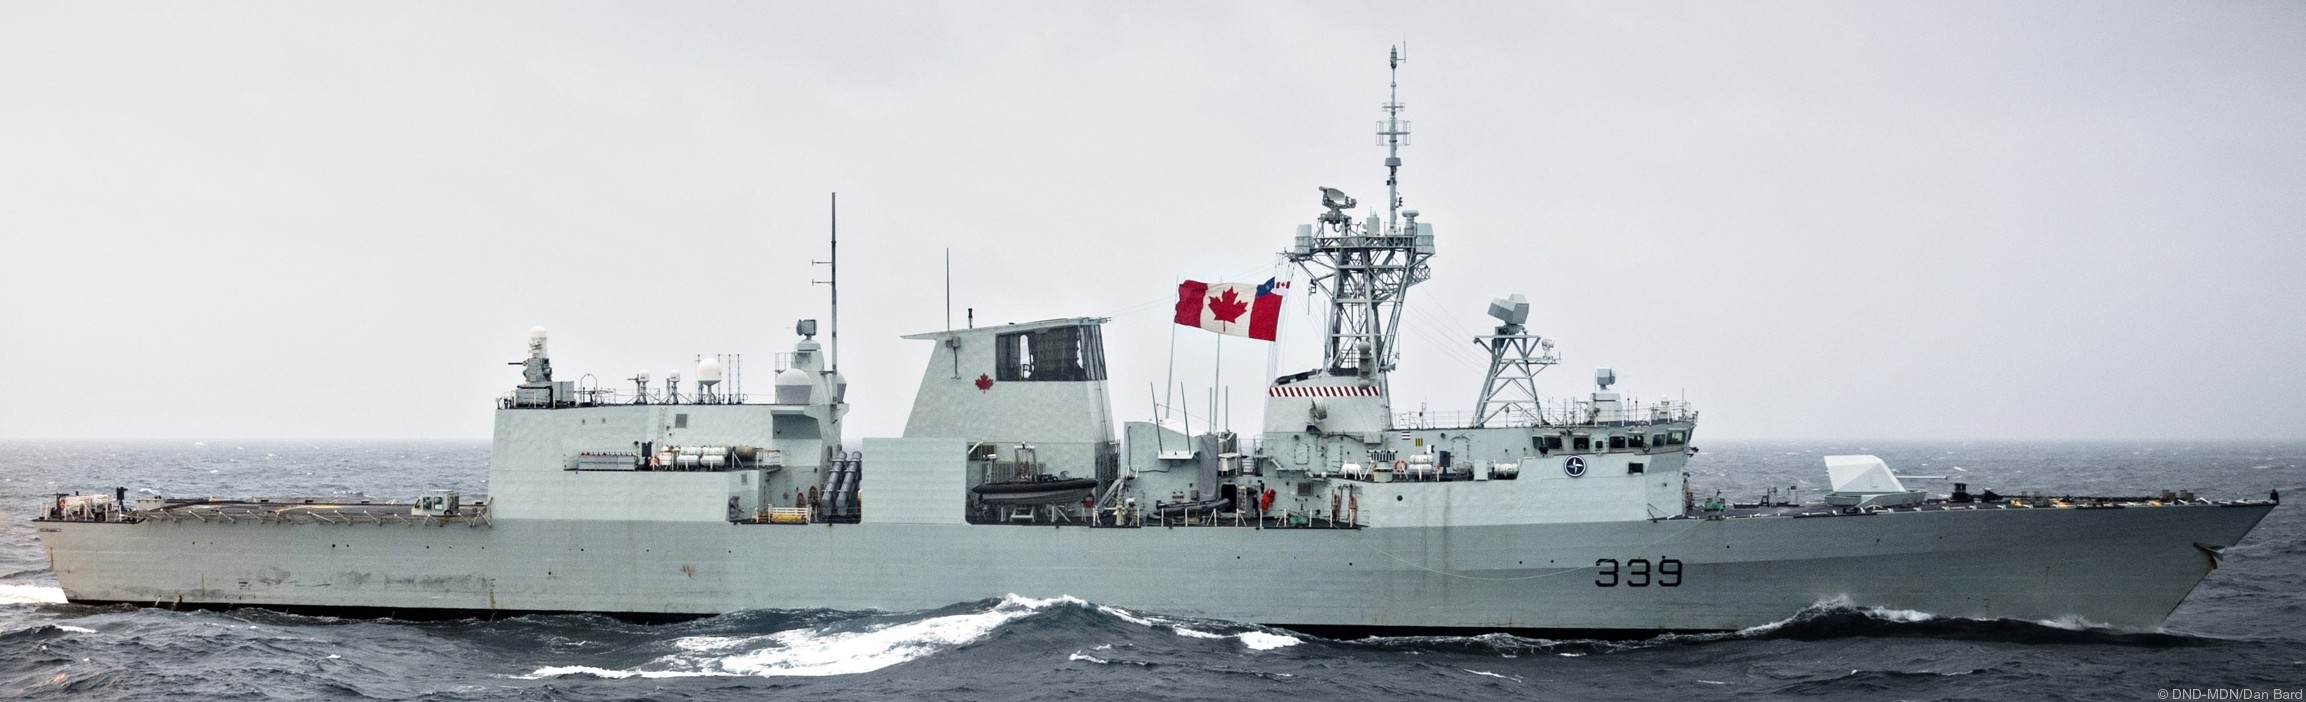 ffh-339 hmcs charlottetown halifax class helicopter patrol frigate ncsm royal canadian navy 28